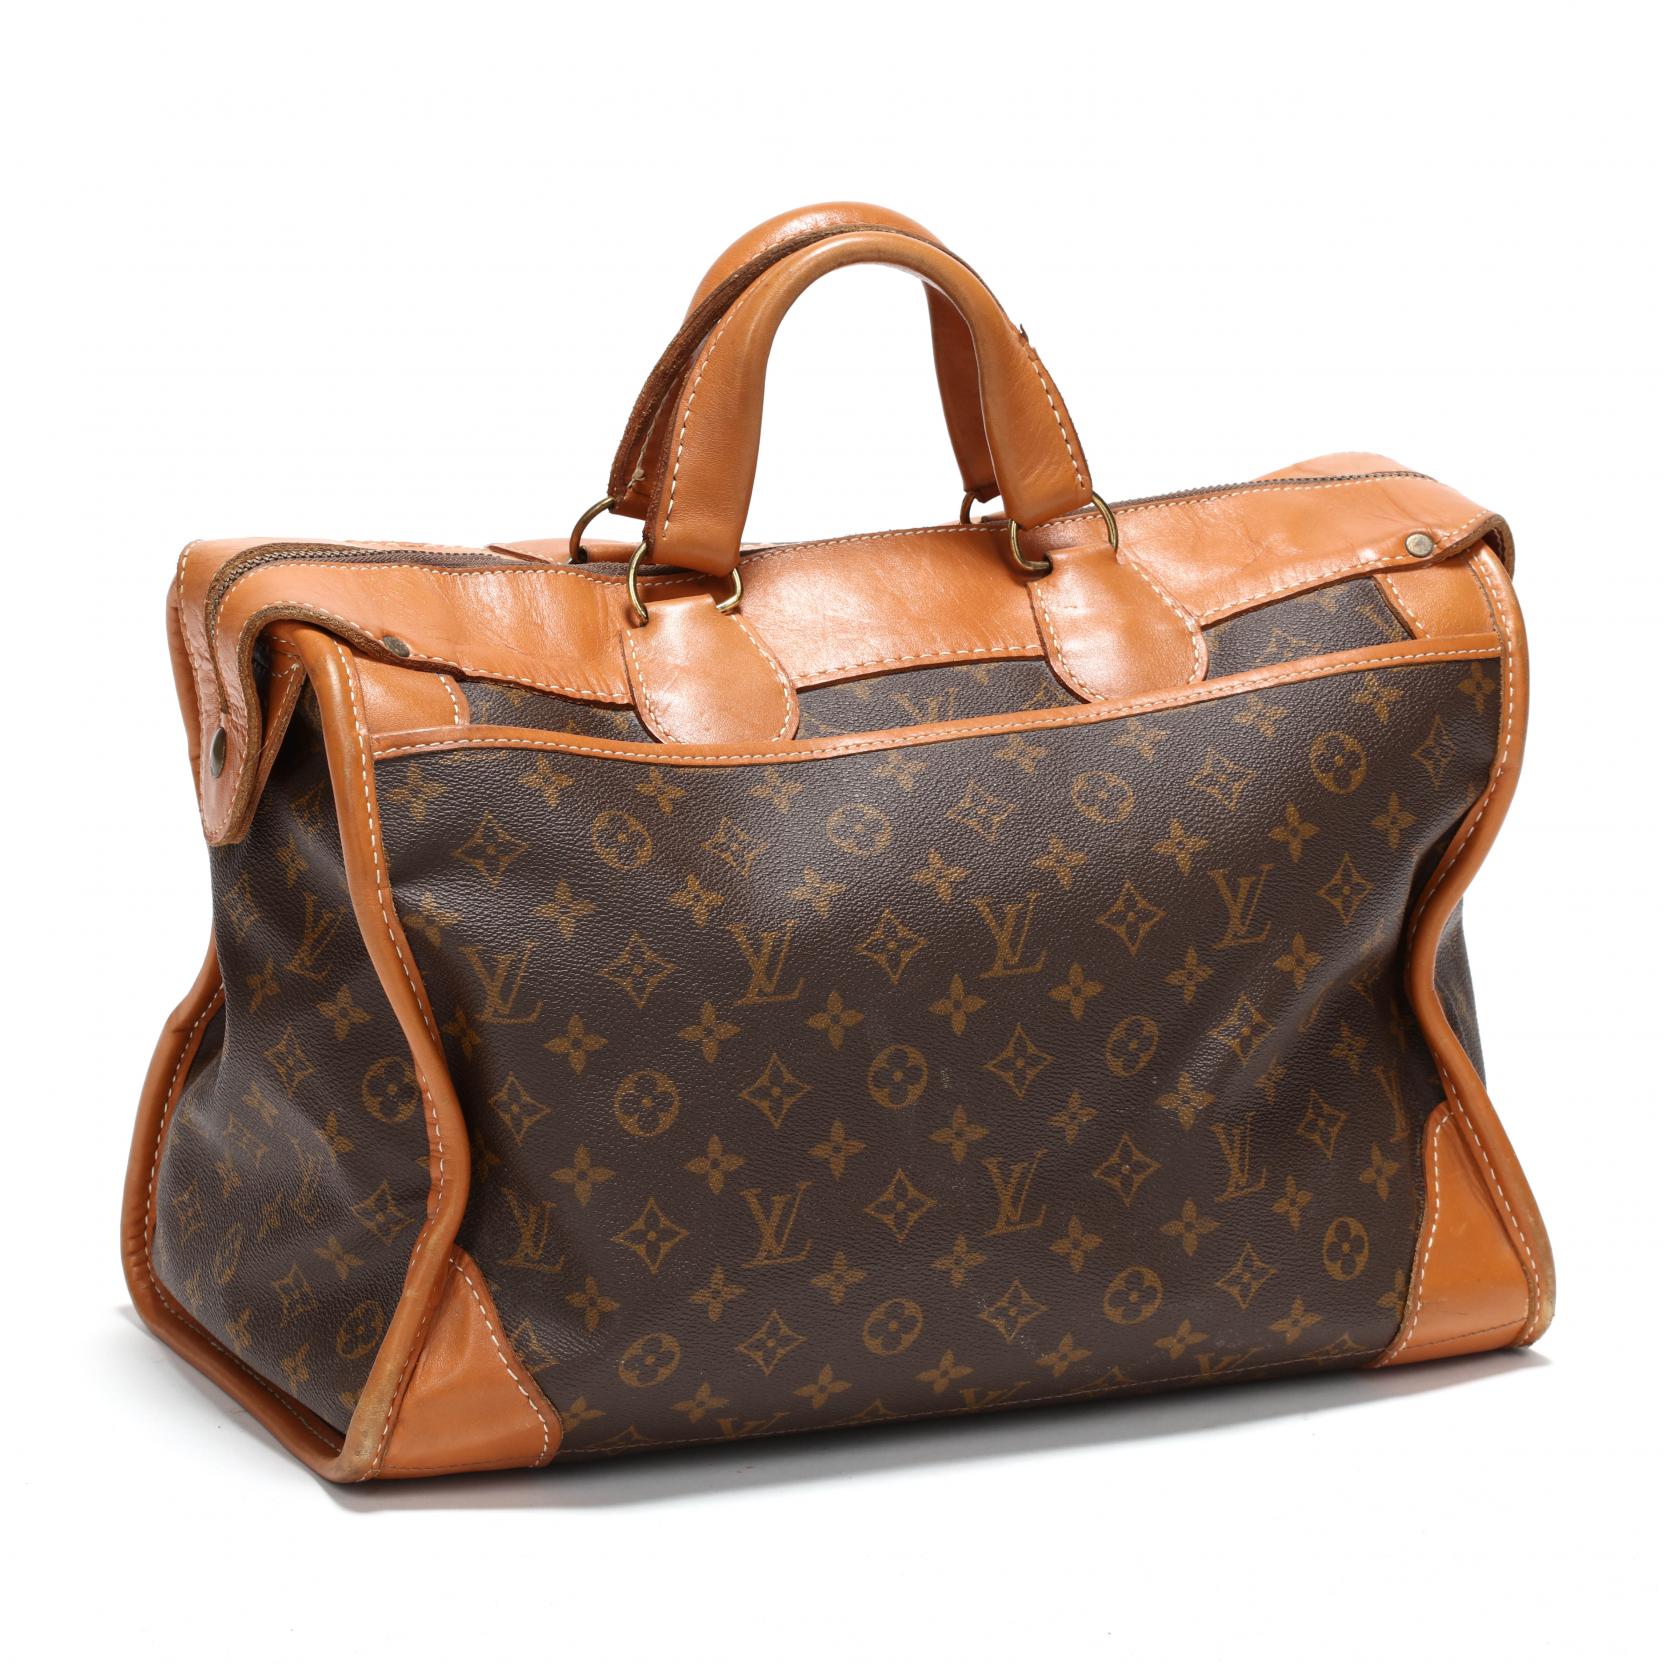 French Company for Louis Vuitton Weekend Travel Bag (Lot 171 - The  Important Fall AuctionSep 19, 2020, 9:00am)